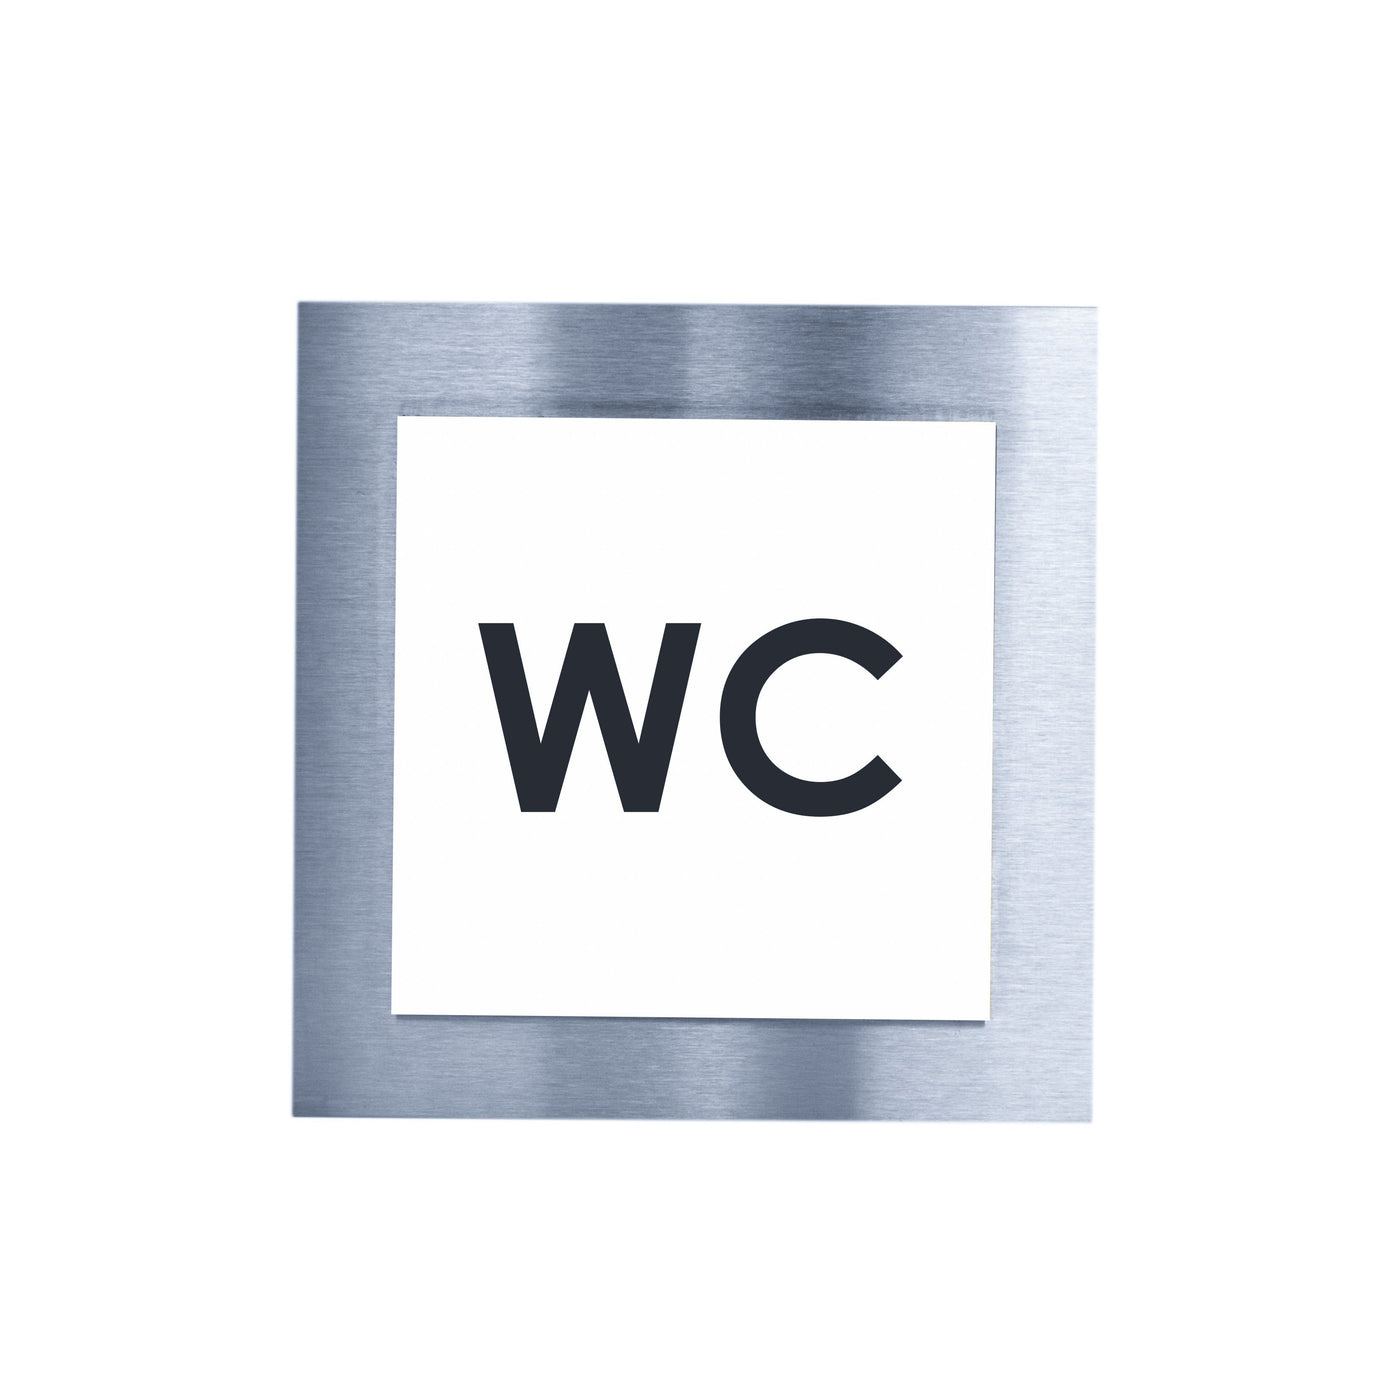 Steel WC Sign for Bathroom Bathroom Signs white / black letters Bsign